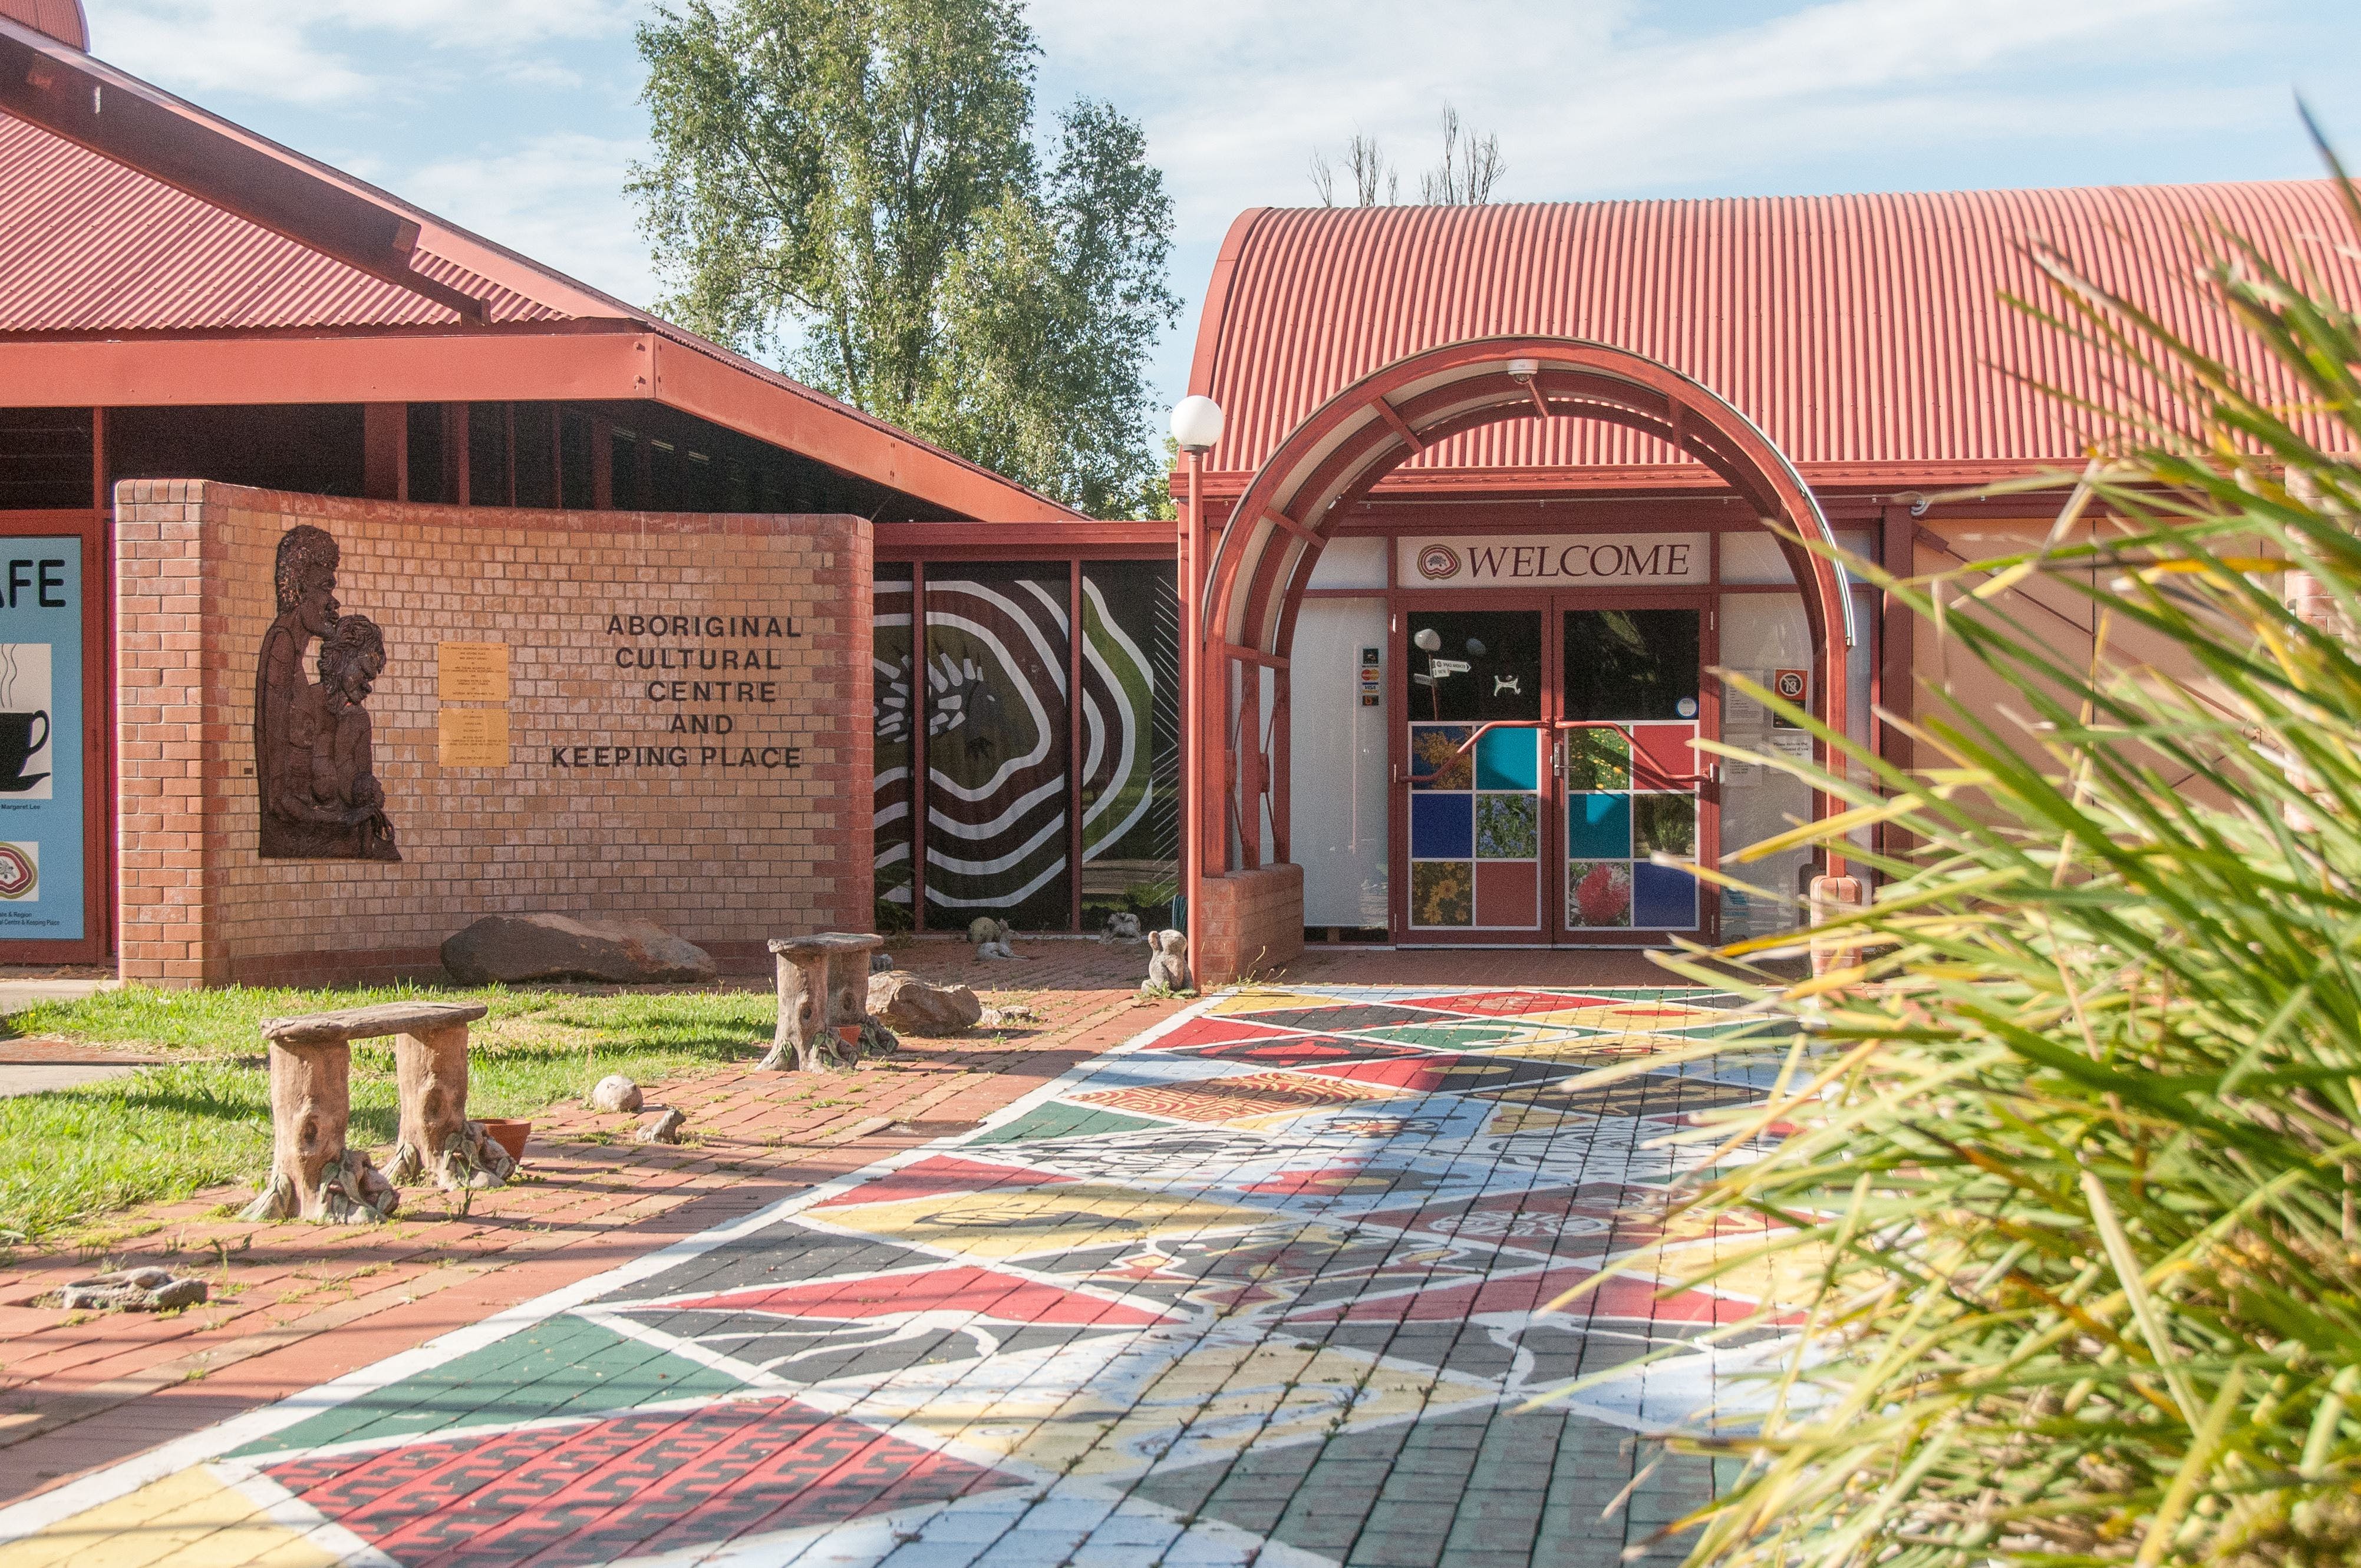 Armidale and Region Aboriginal Cultural Centre and Keeping Place - Find Attractions